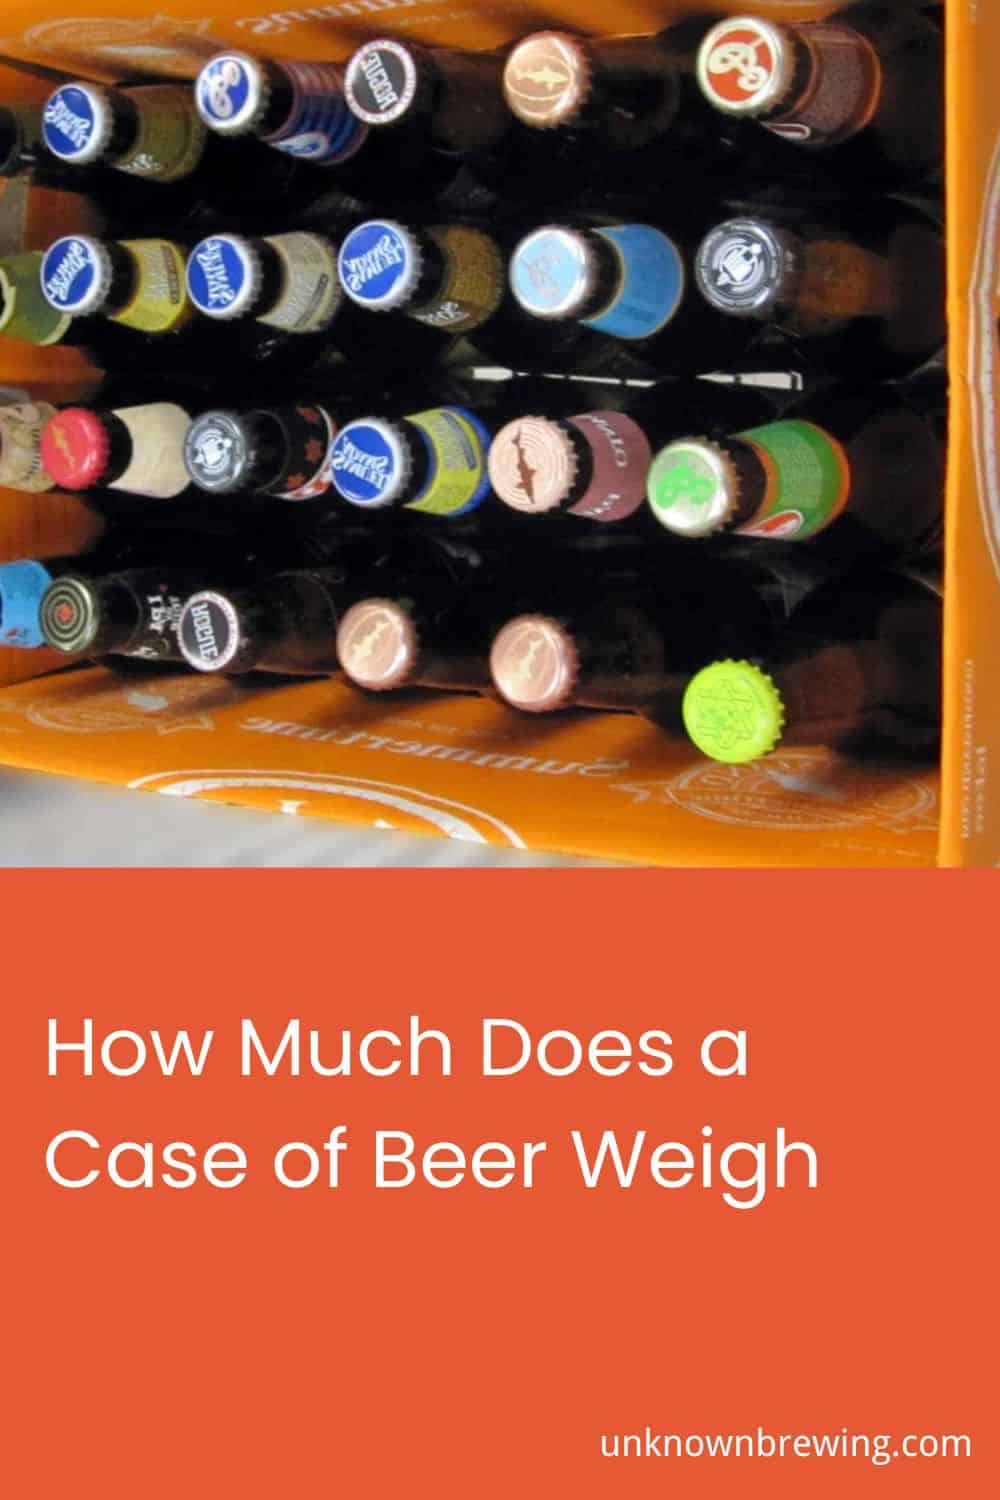 How Much Does a Case of Beer Weigh